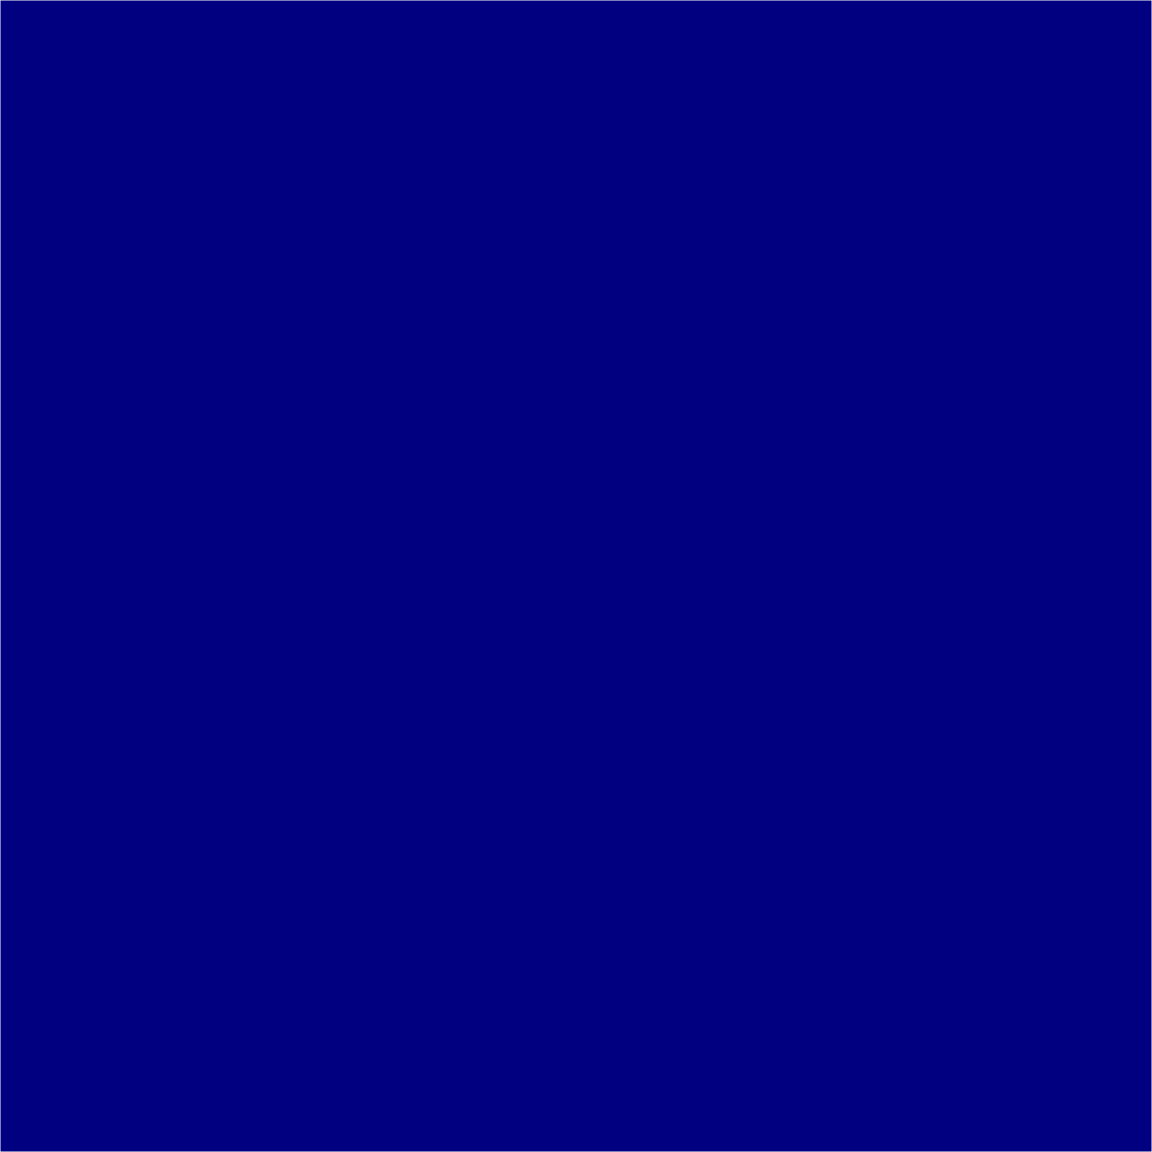 Solid Navy Blue Background Image Pictures Becuo